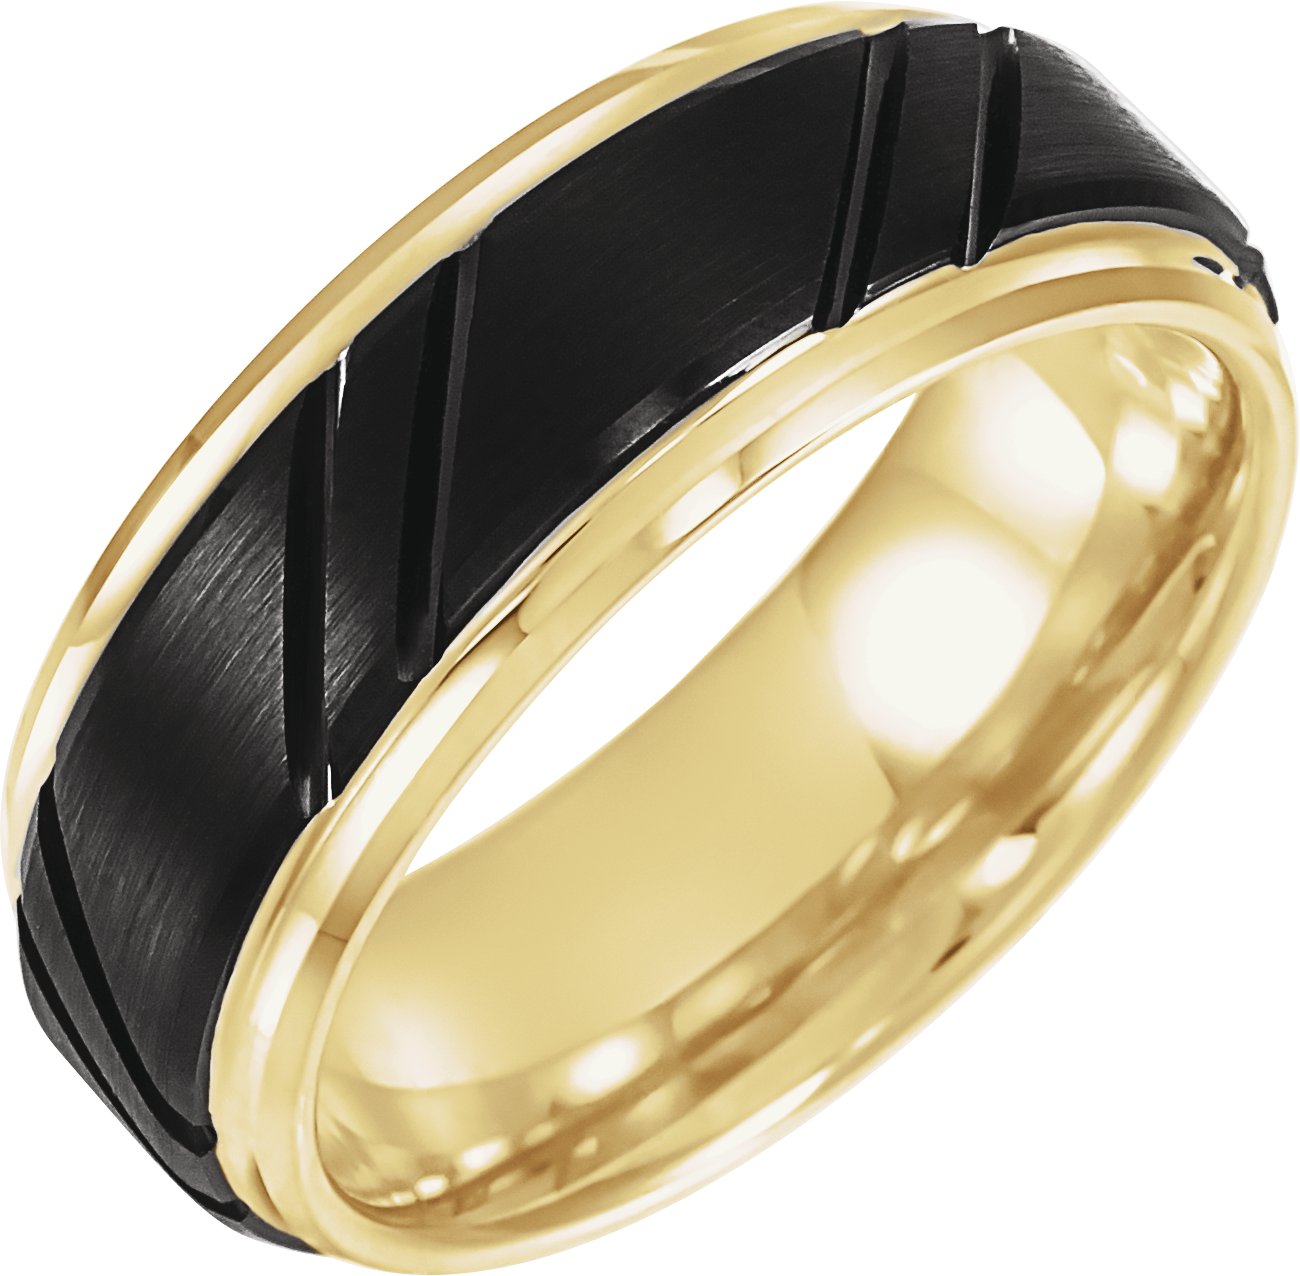 18K Yellow Gold-Plated & Black PVD Tungsten 8 mm Grooved Band Size 9.5